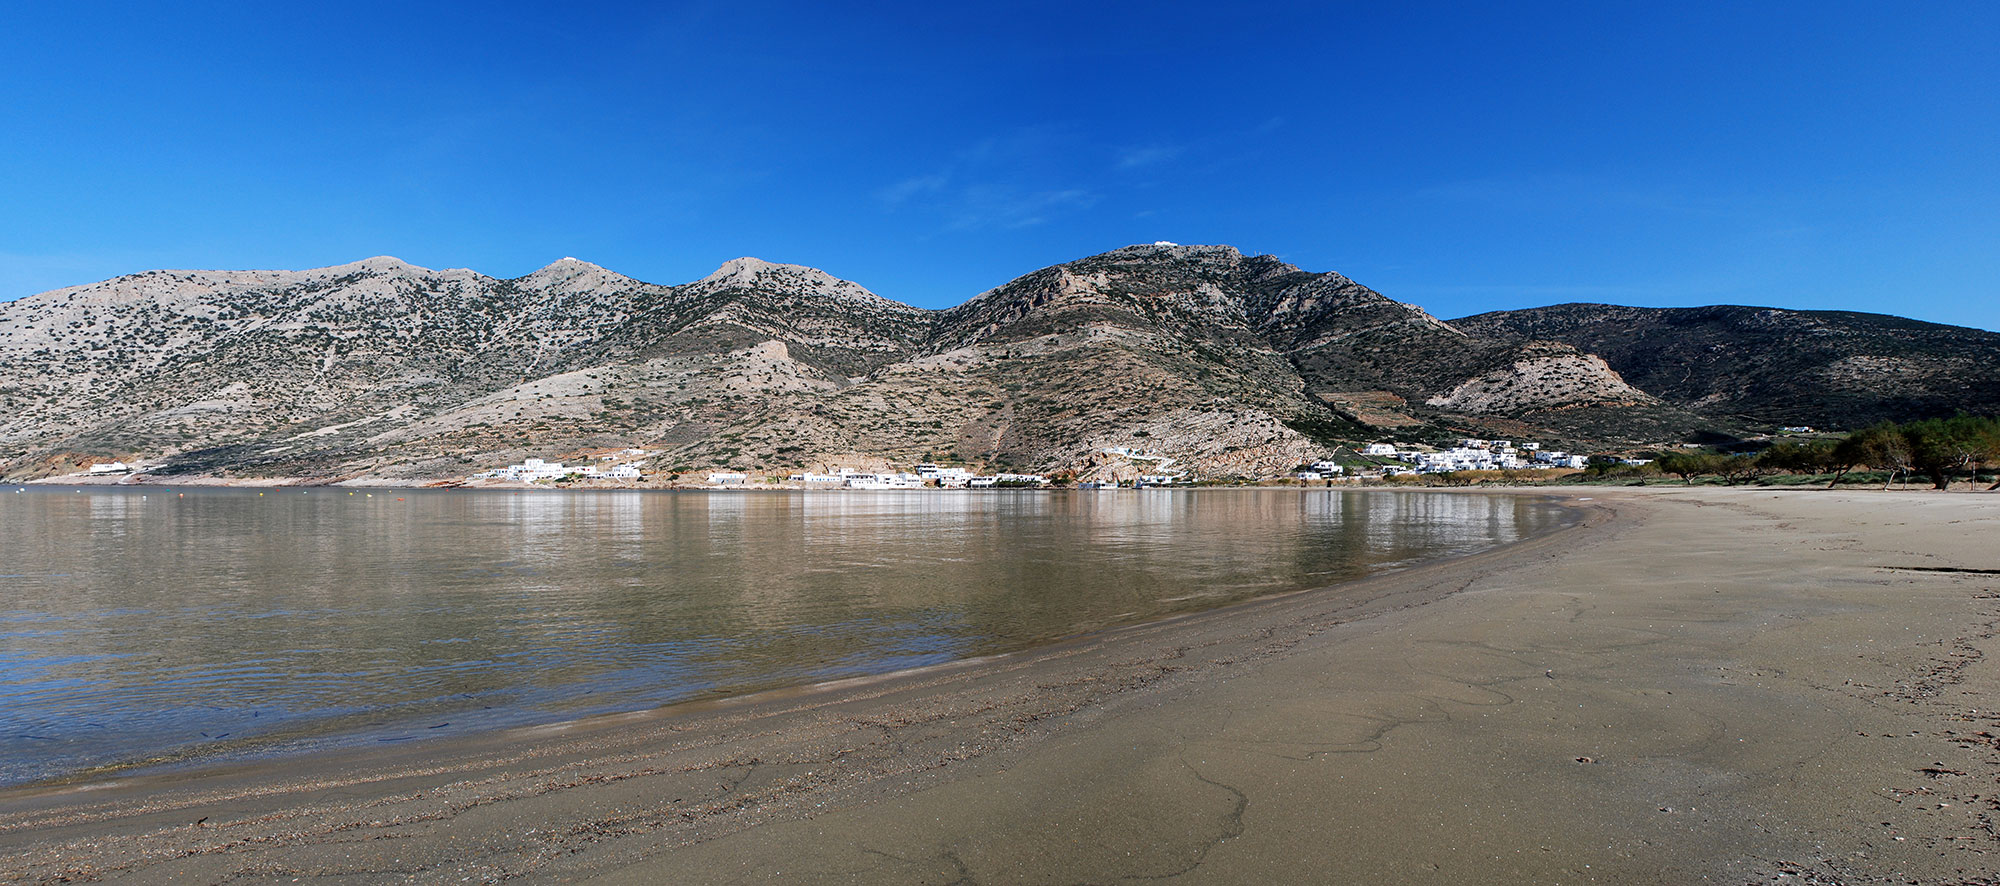 The beach of Kamares at Sifnos